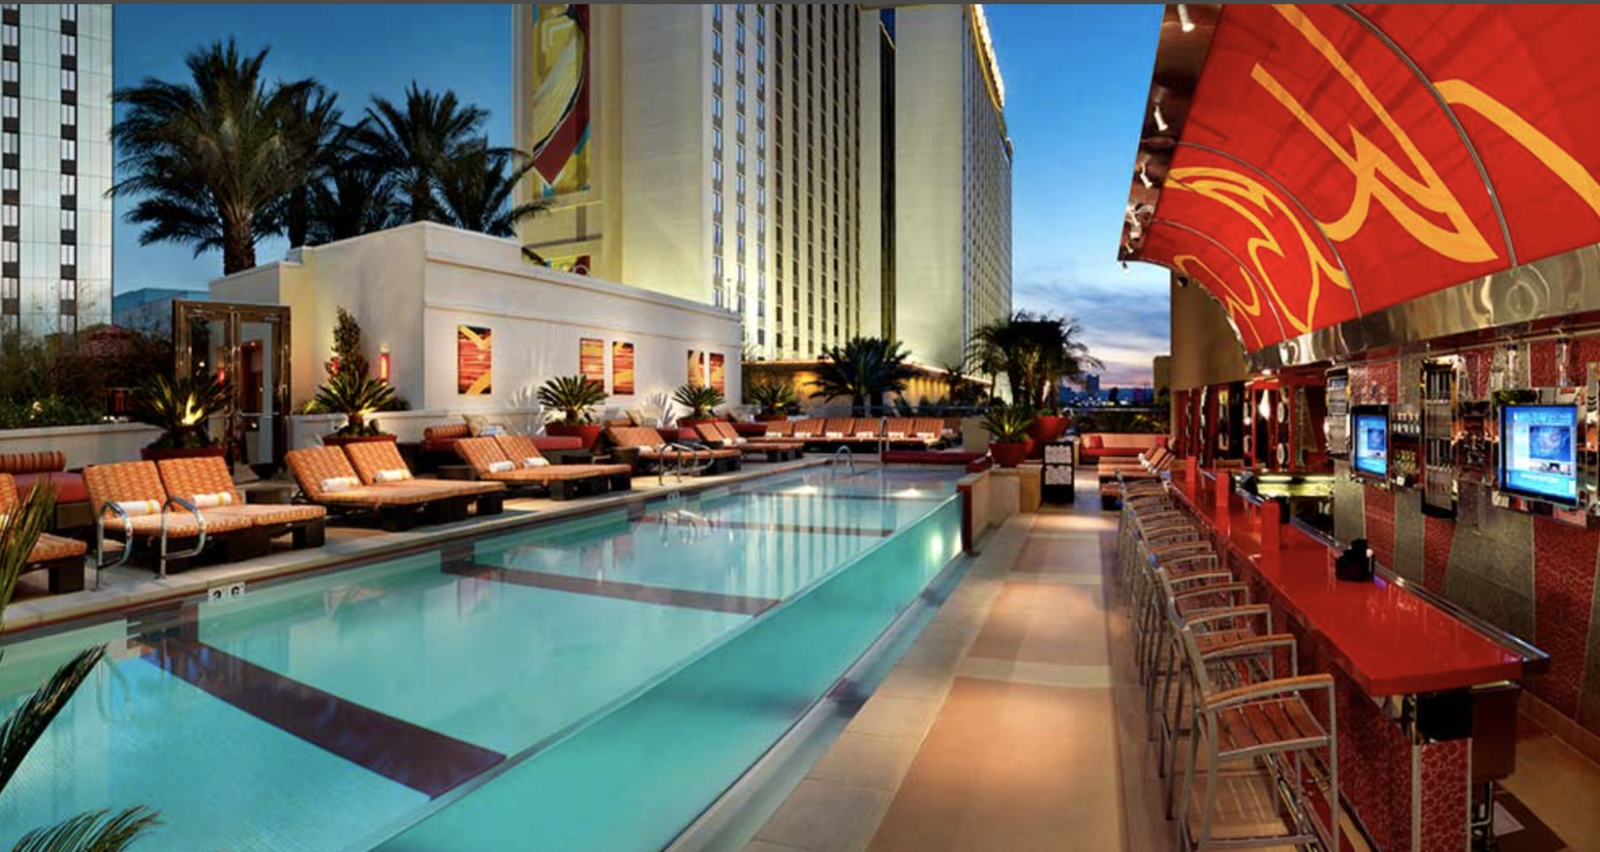 Golden Nugget Vegas Pools for Families